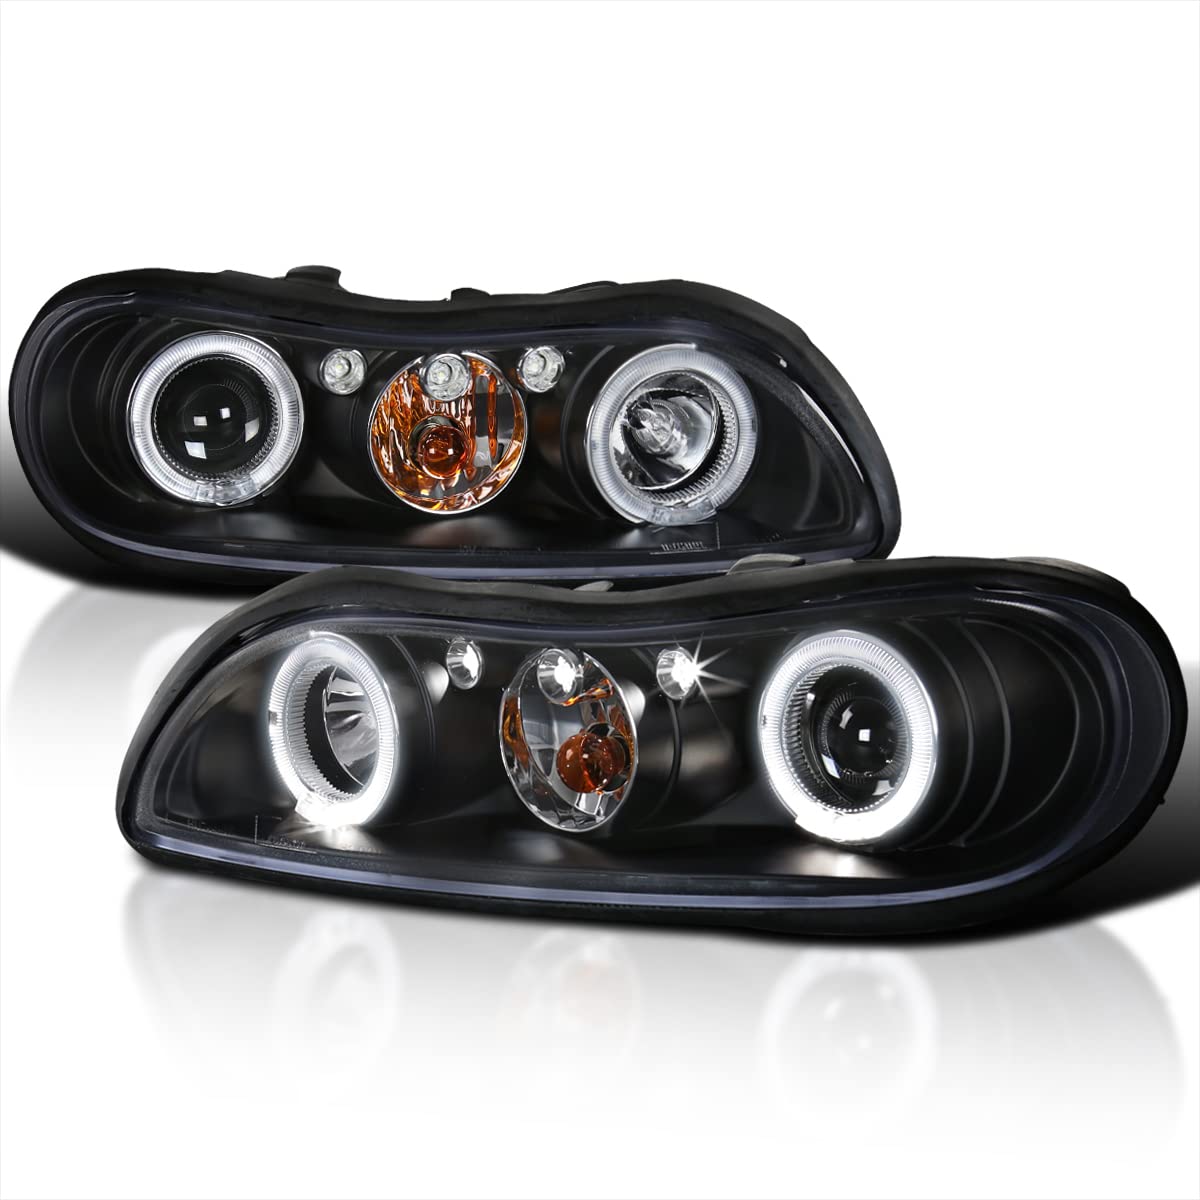 SPEC-D TUNING Black LED Headlights Compatible with 1997-2003 Chevy Malibu,  2004-2005 Chevy Classic, 1997-1999 Oldsmobile Cutlass Left + Right Pair  Headlamps Assembly